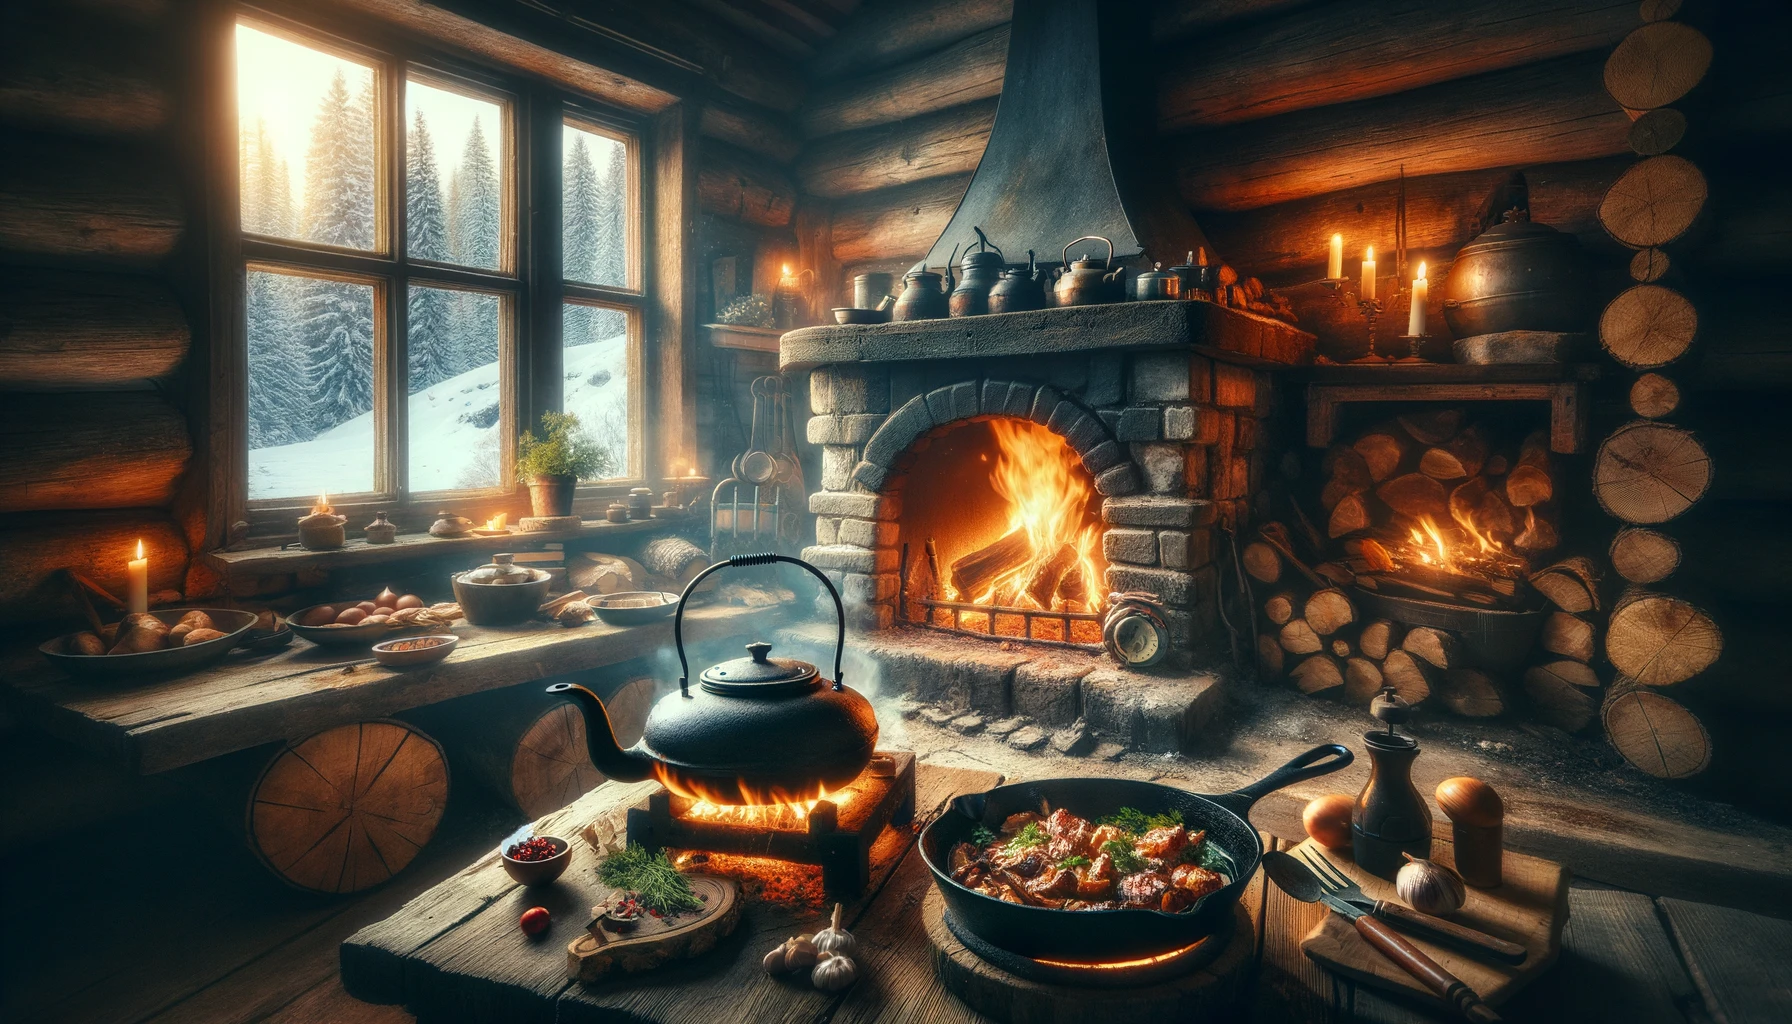 Cozy rustic cabin interior with a crackling wood fireplace cooking a hearty meal on a cast iron skillet, evoking warmth and nostalgia, surrounded by ingredients and a snowy landscape outside, illustrating the joy of traditional cooking